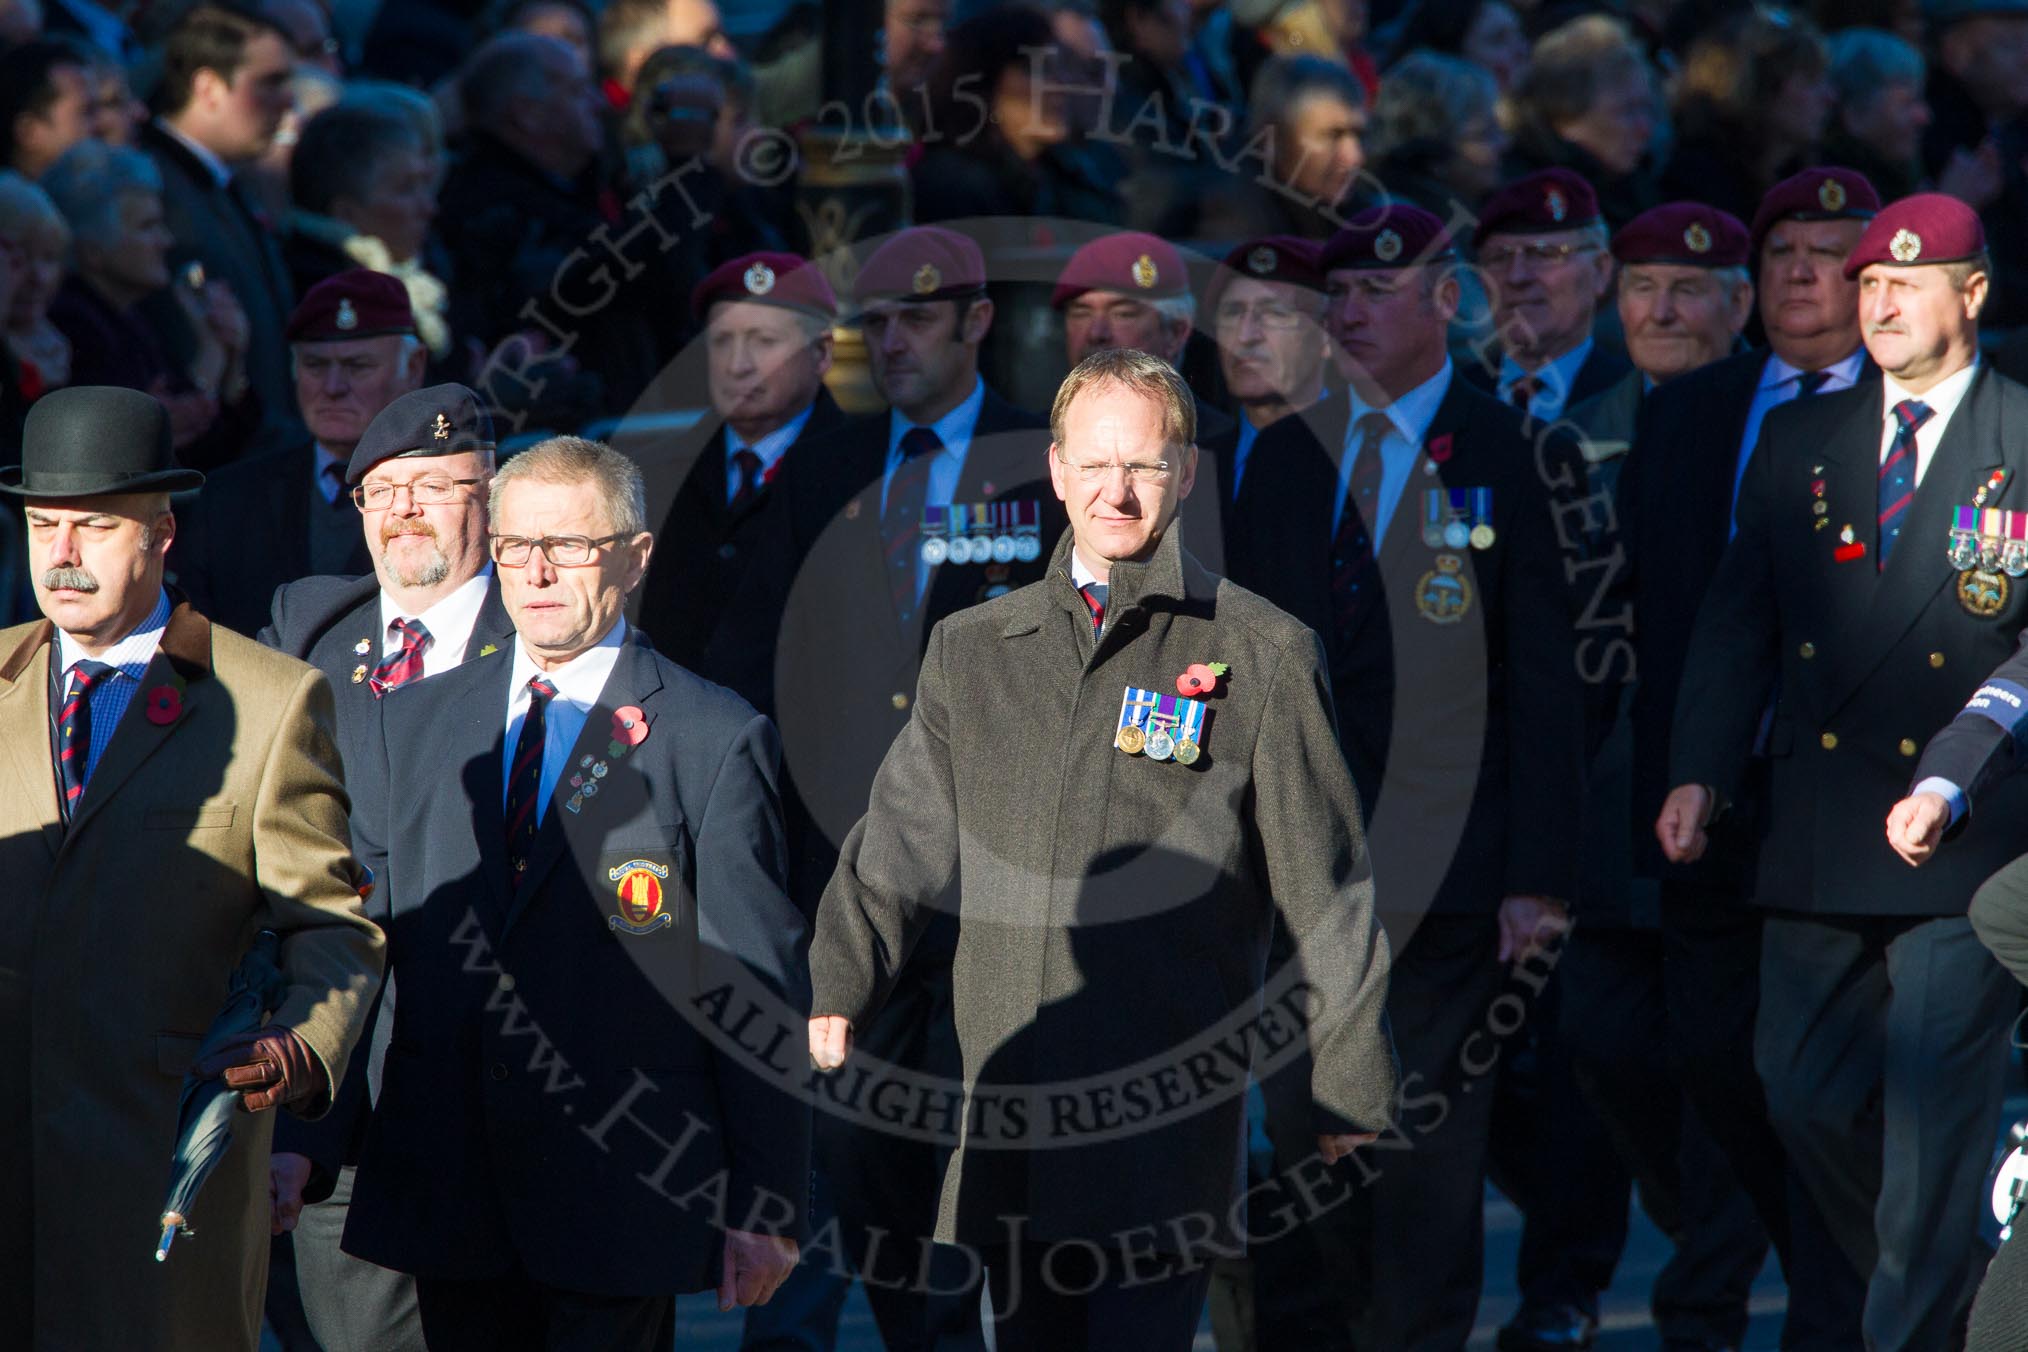 Remembrance Sunday Cenotaph March Past 2013: B21 - Royal Engineers Bomb Disposal Association..
Press stand opposite the Foreign Office building, Whitehall, London SW1,
London,
Greater London,
United Kingdom,
on 10 November 2013 at 12:02, image #1480